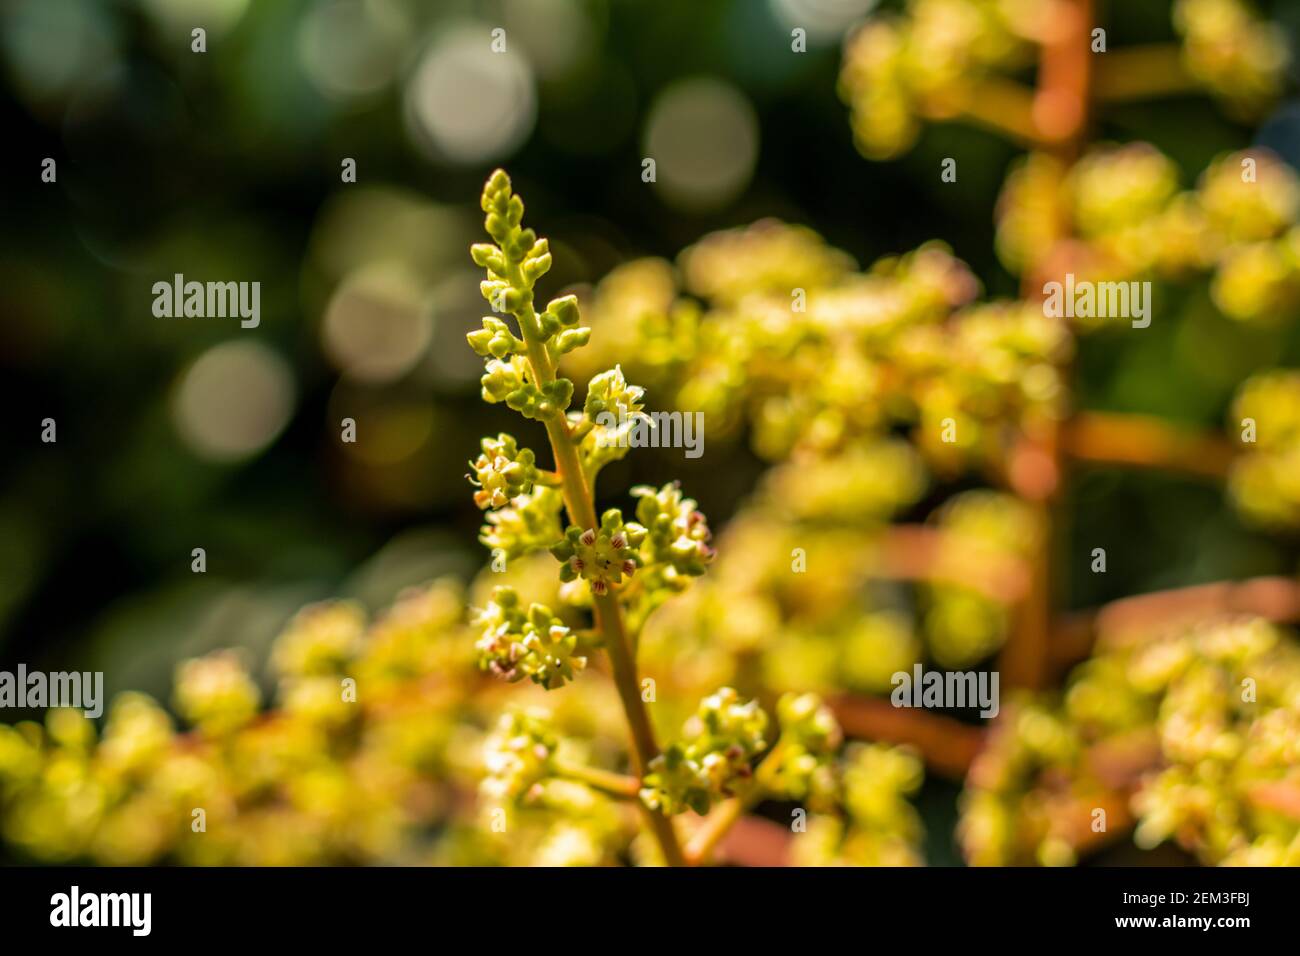 https://c8.alamy.com/comp/2EM3FBJ/a-mango-fruit-tree-in-full-flower-is-a-beautiful-sight-indeed-the-flowers-are-pollinated-by-insects-2EM3FBJ.jpg